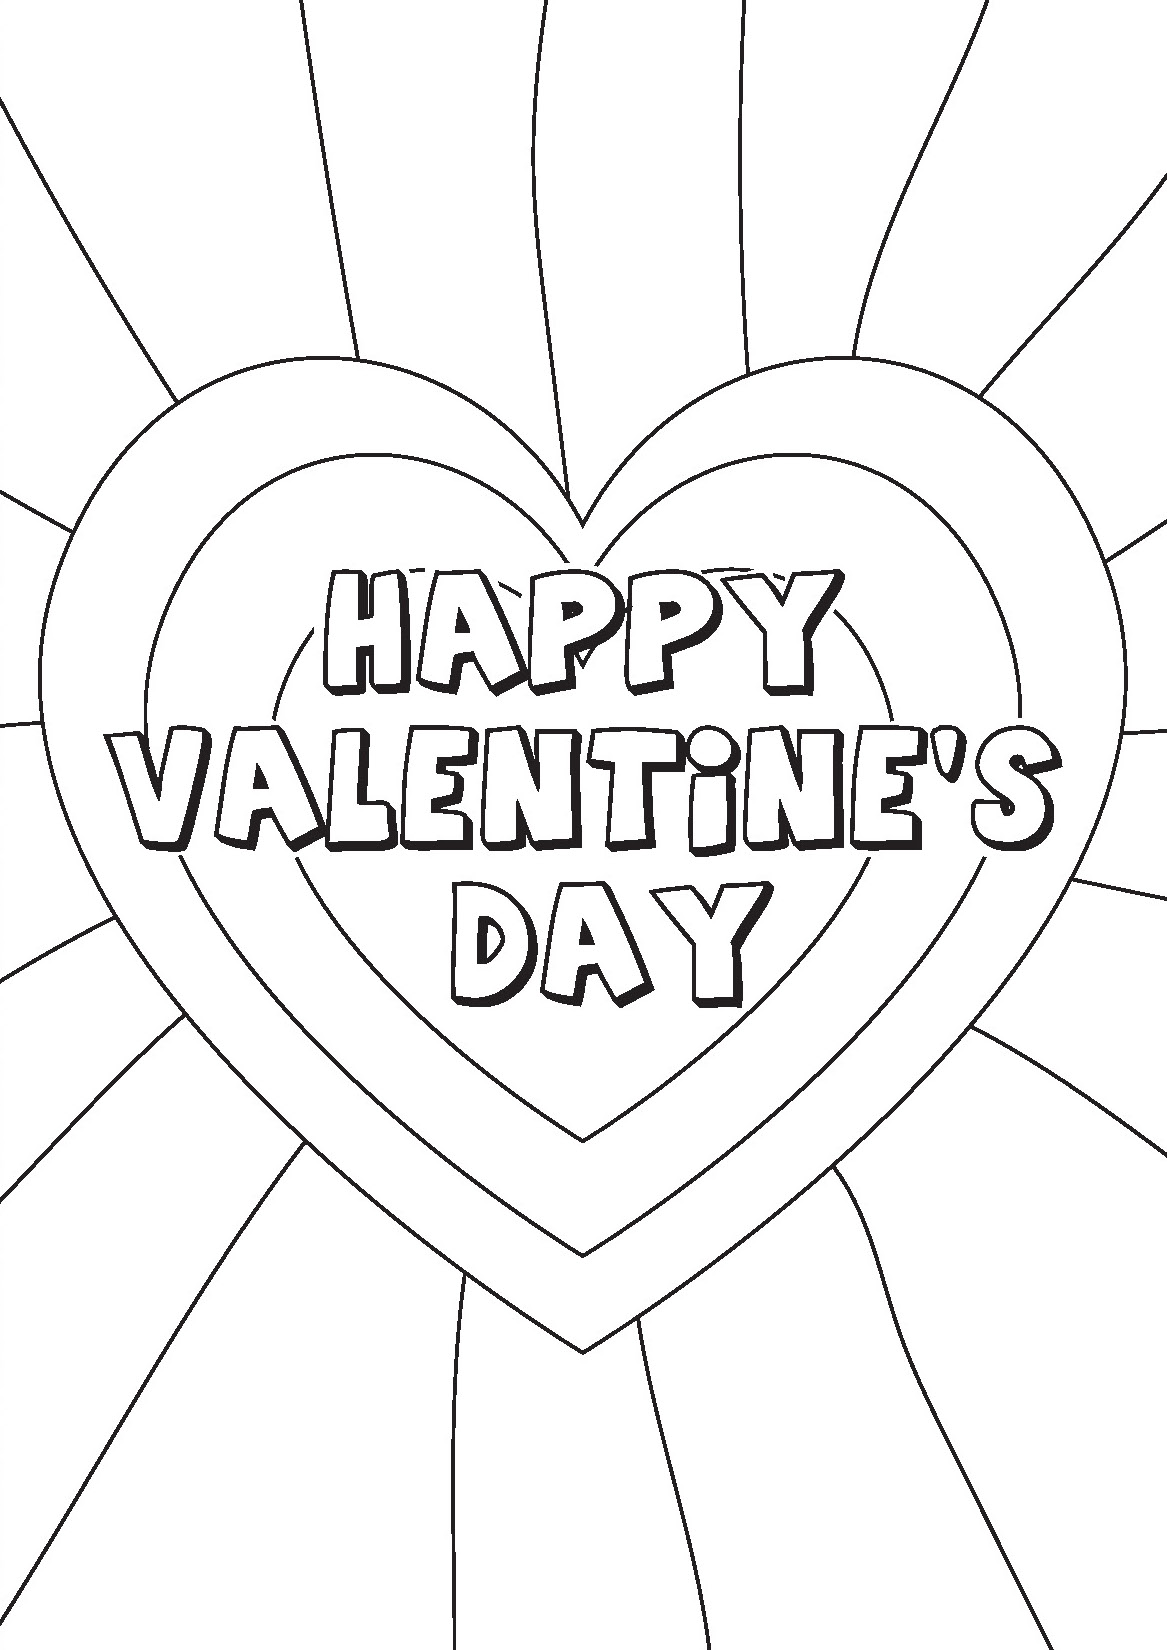 Happy Valentine's Day Colouring In Card  image